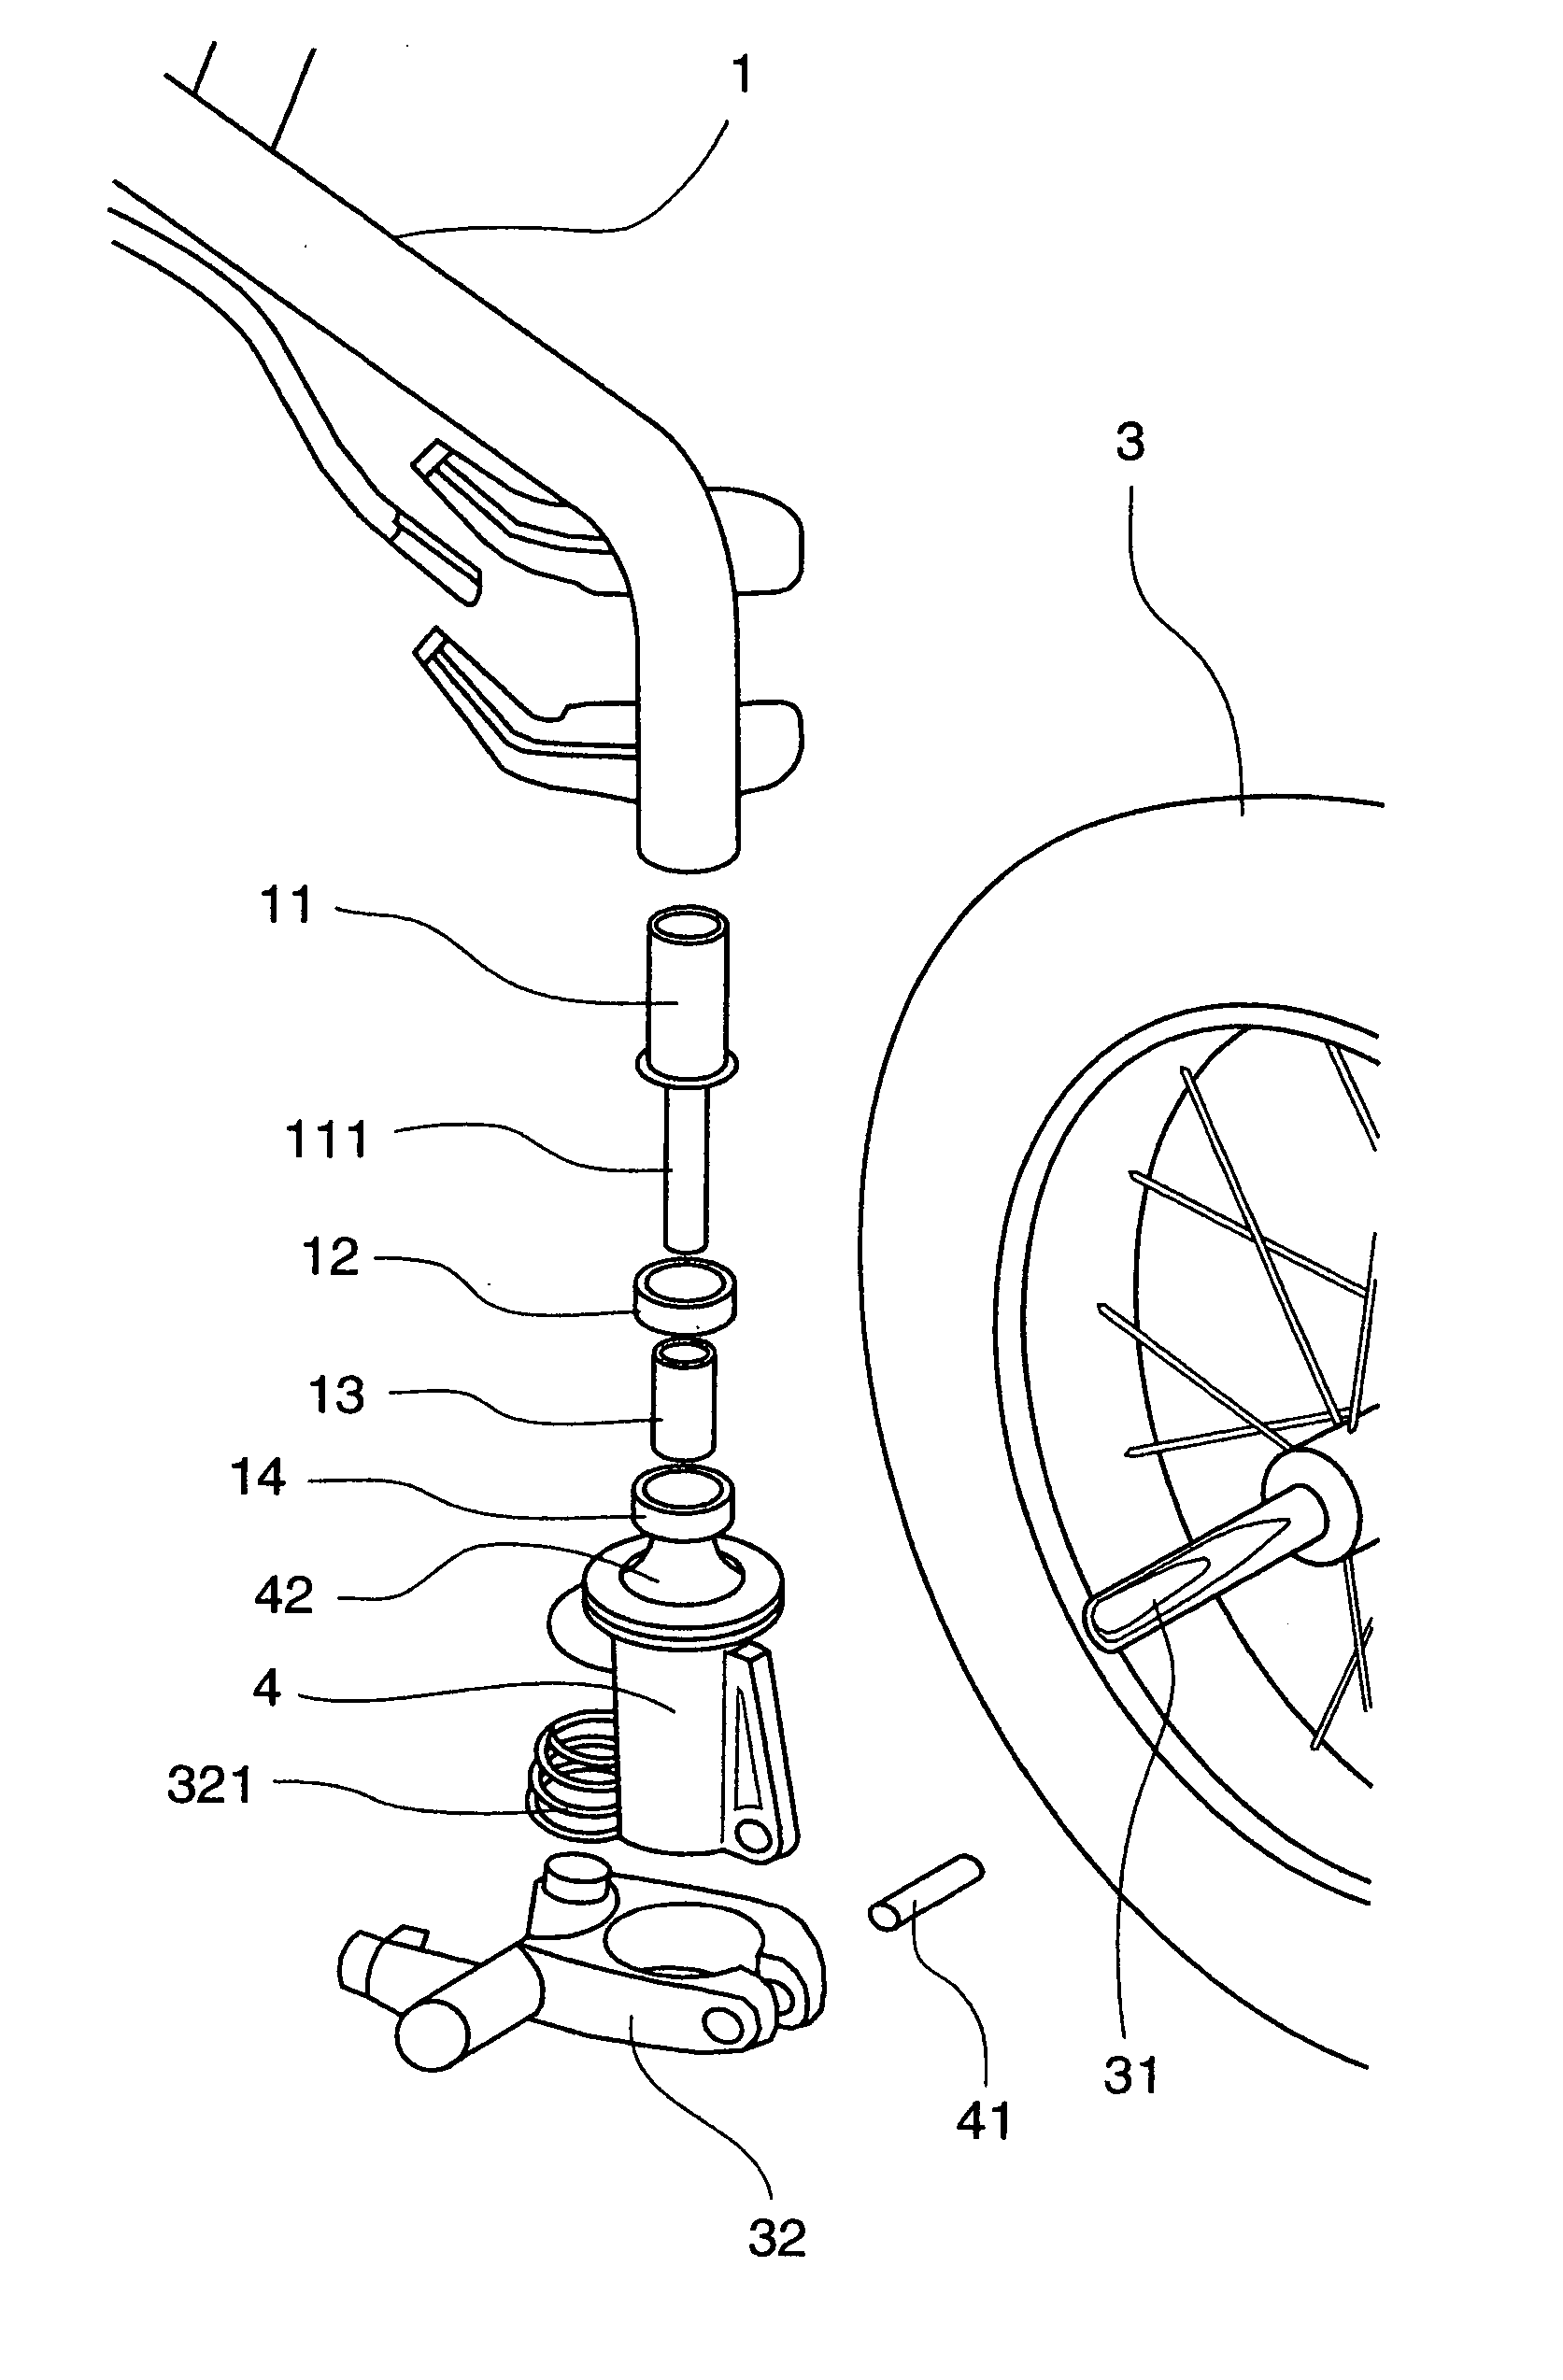 Baby carriage with directional wheels that pivot in unison by semi-rigid means